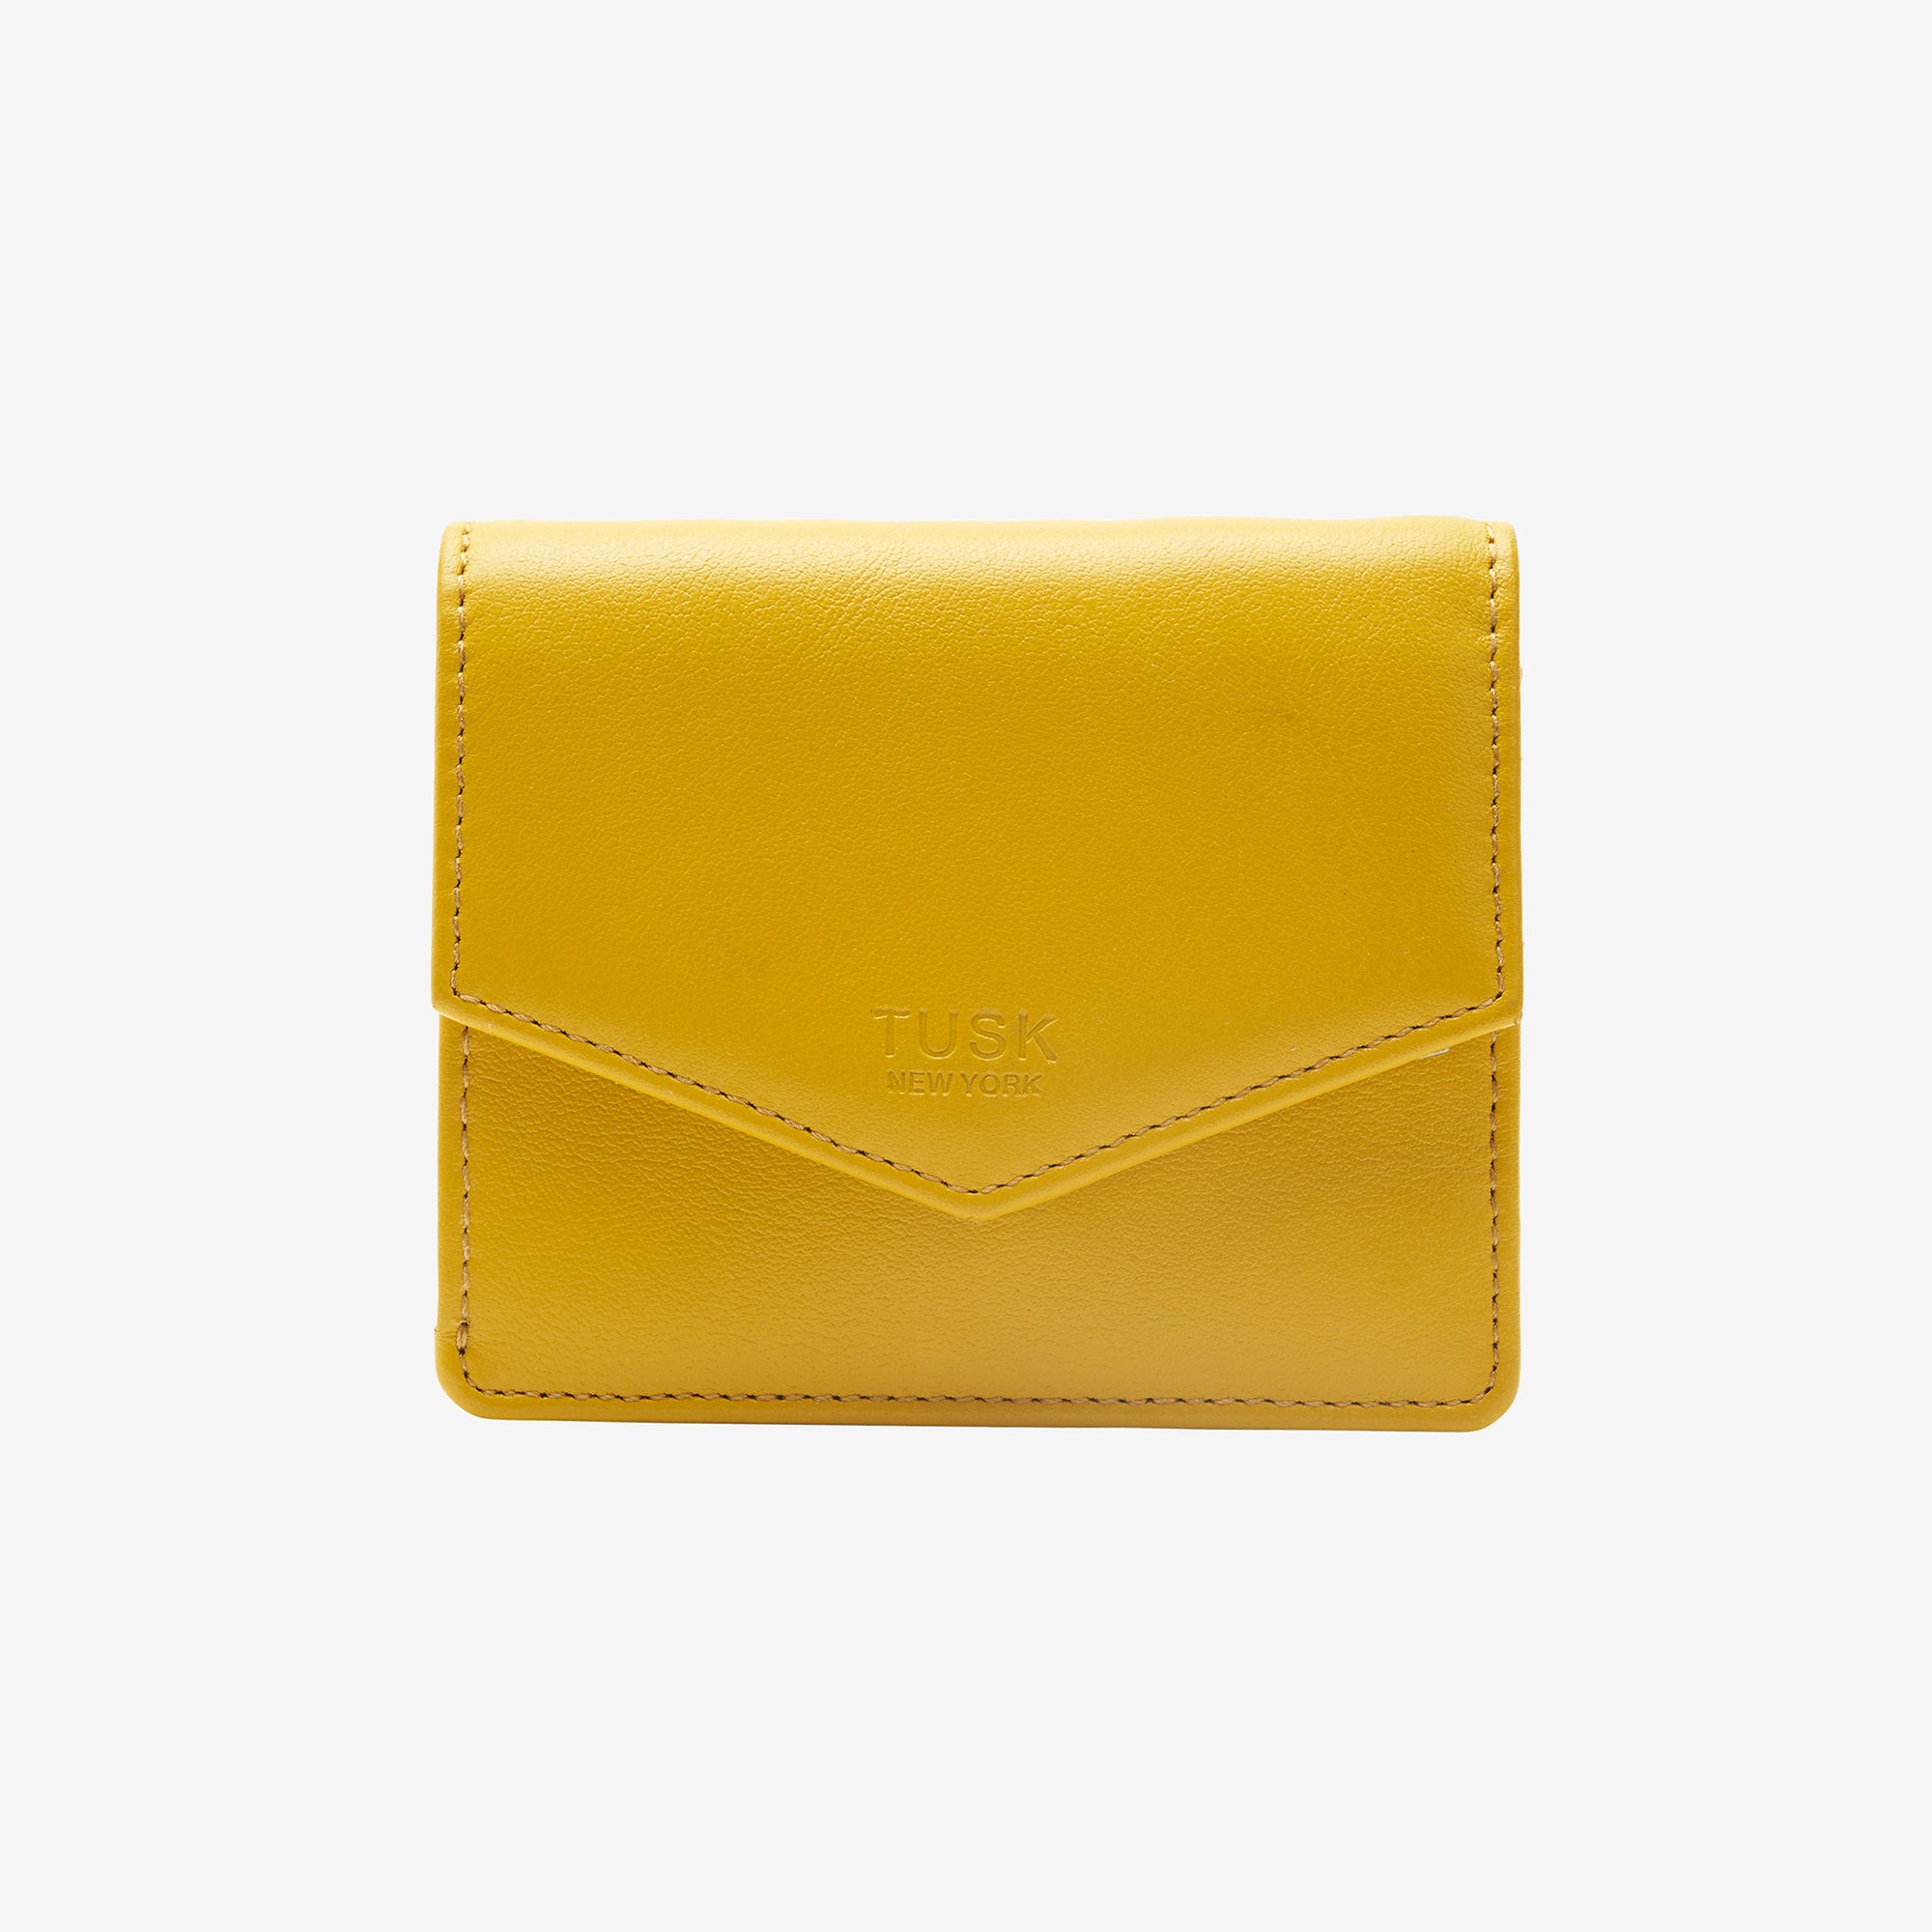 tusk-435-joy-leather-gusseted-french-wallet-sun-front